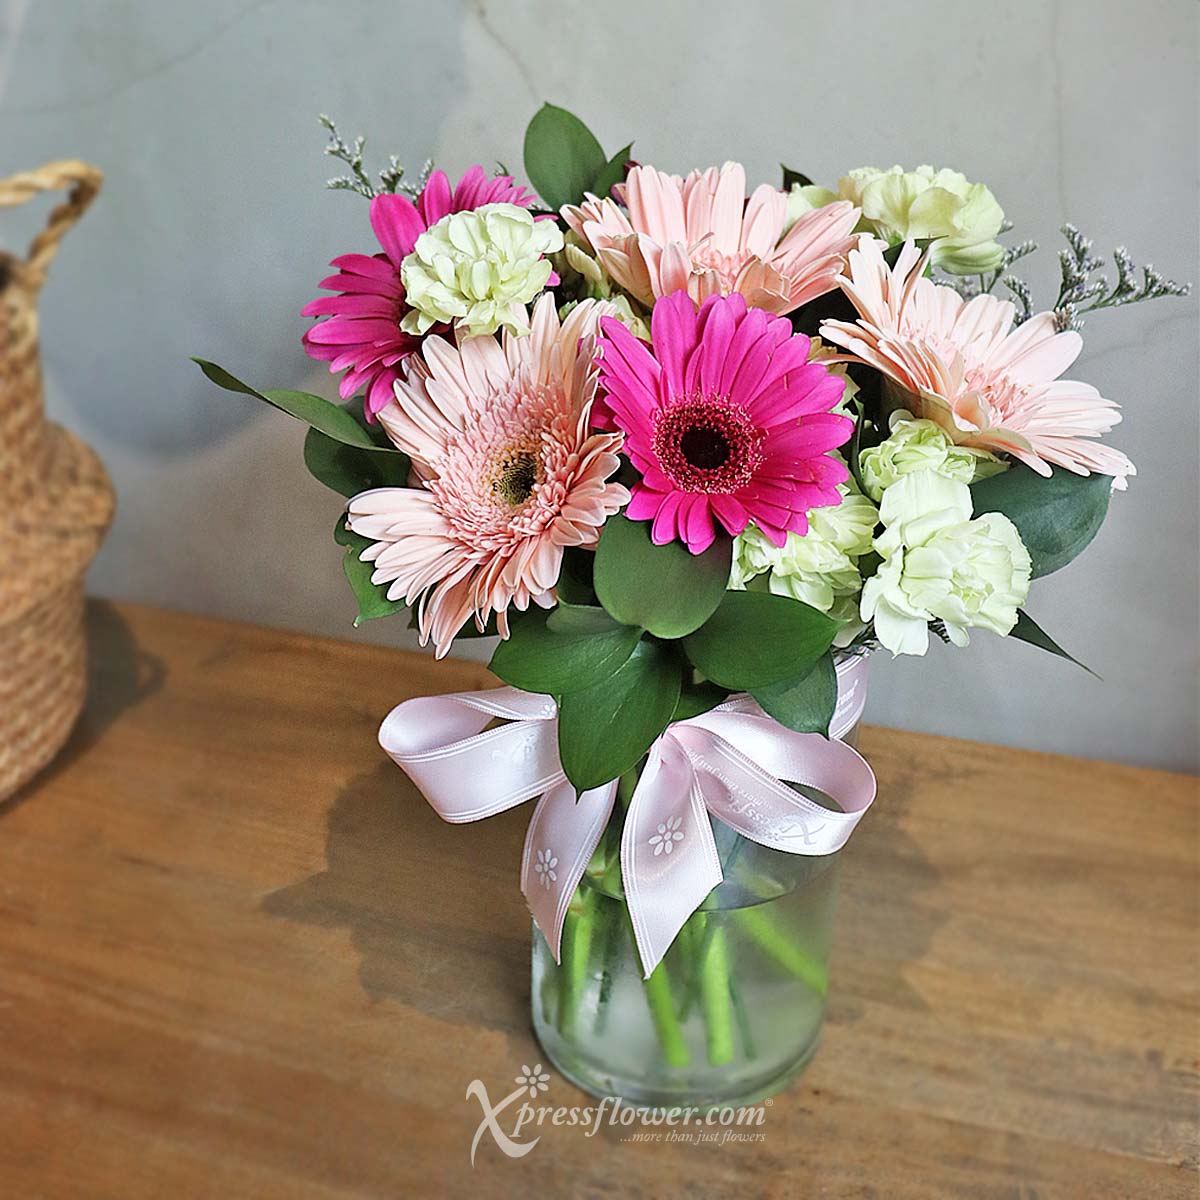 AR2307 Charismatic Classic (6 Mix Purple & Pink Gerberas with Green Carnation Spray) 3a